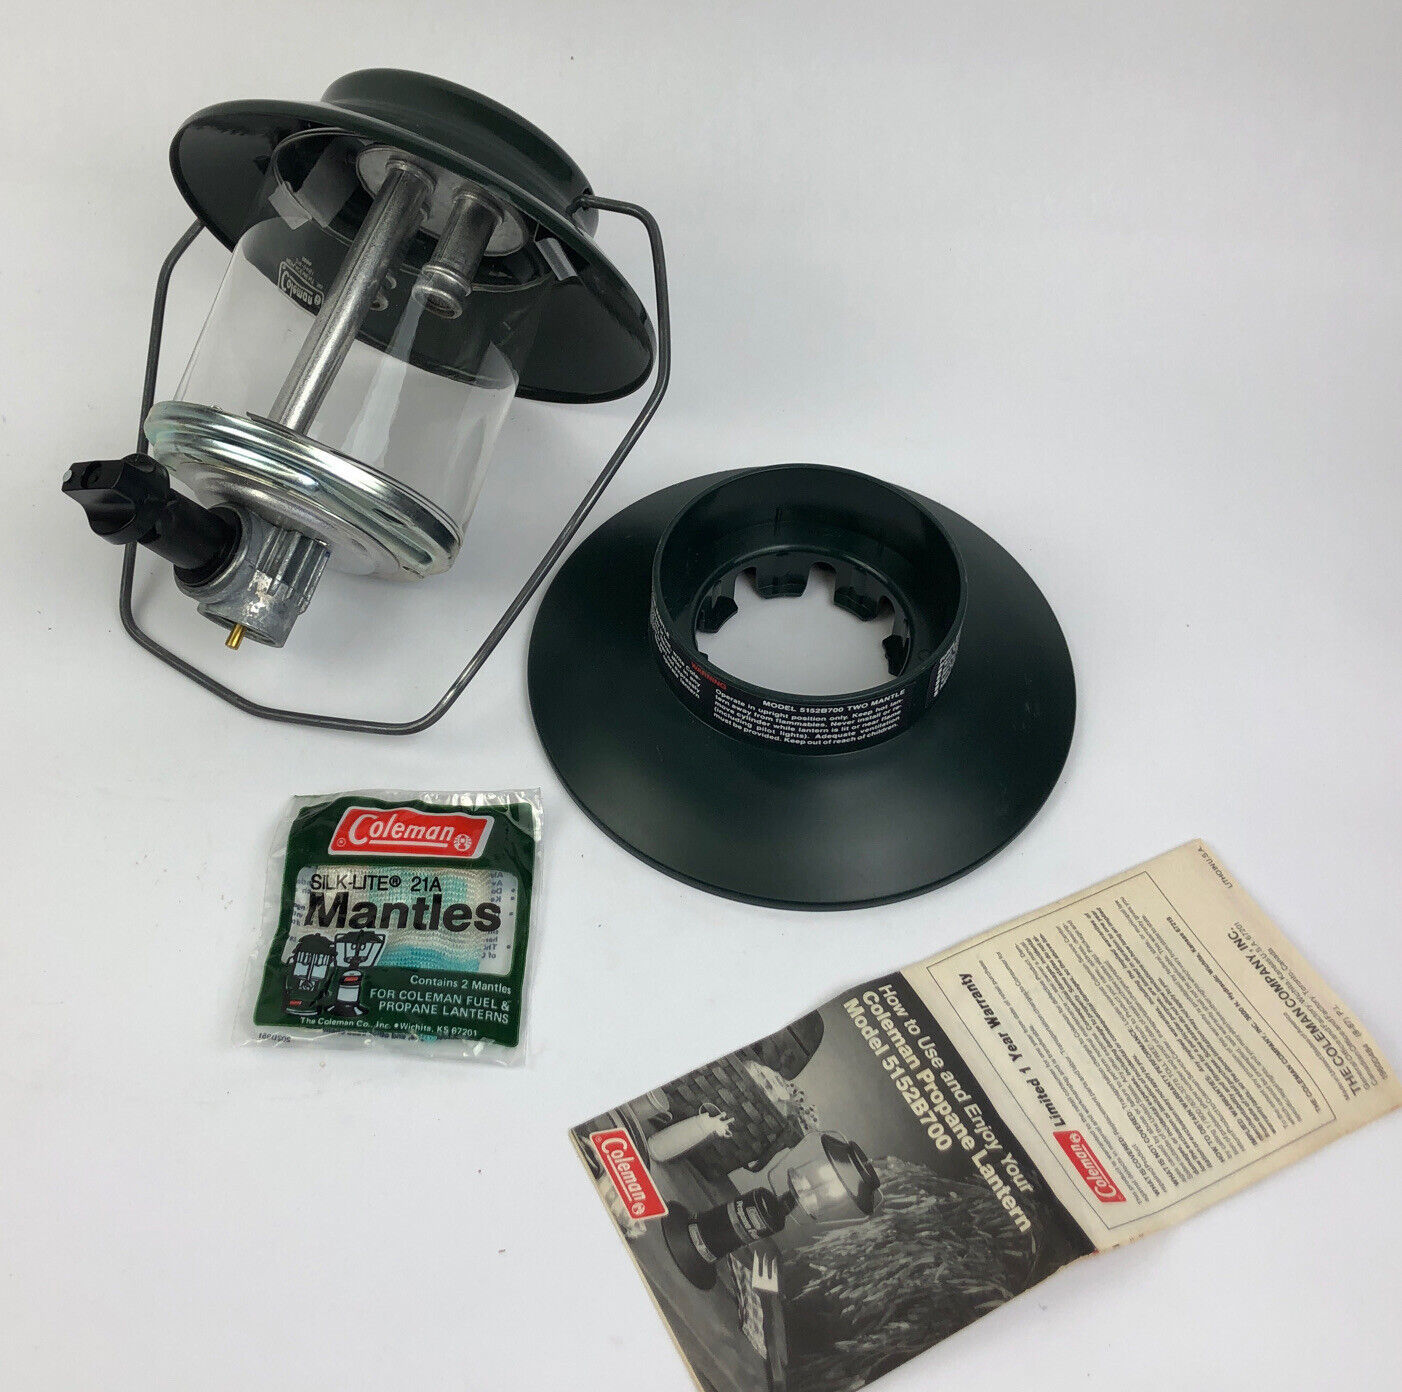 Primary image for VINTAGE Coleman Two Mantle Propane Camping Lantern MODEL - 5152D700 NOS LOOK